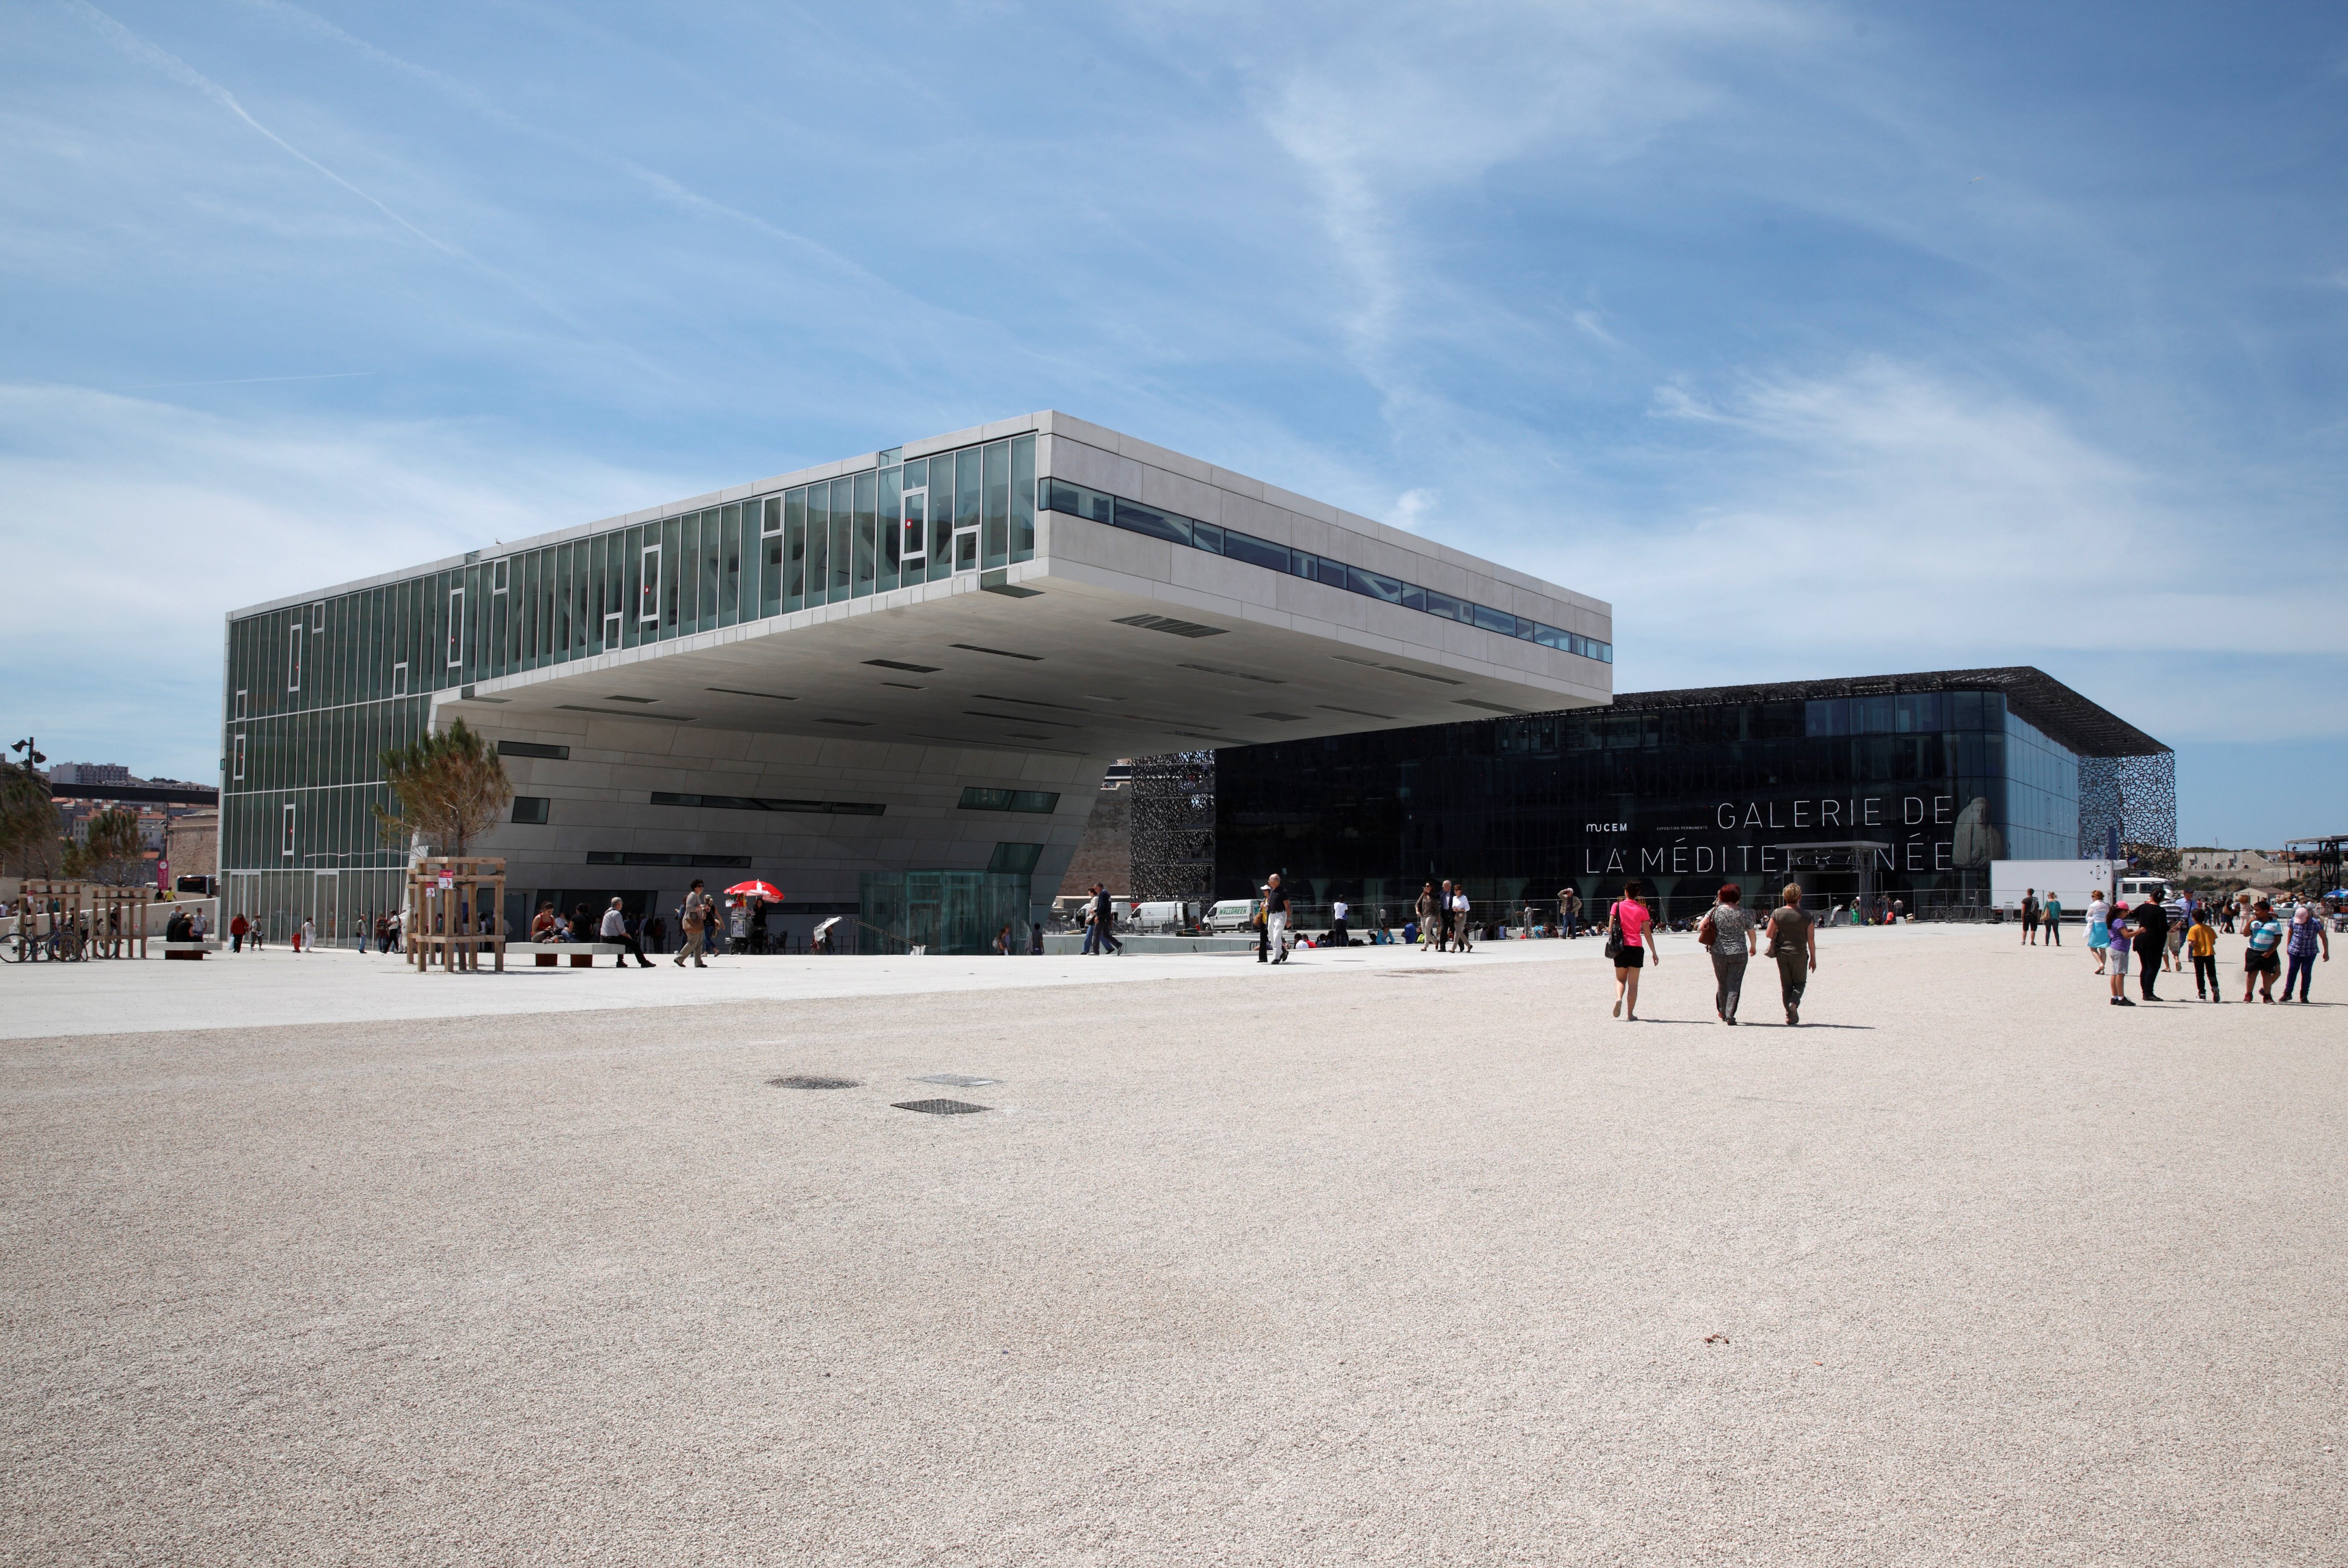 Mucem - Museum of Civilizations of Europe and the Mediterranean